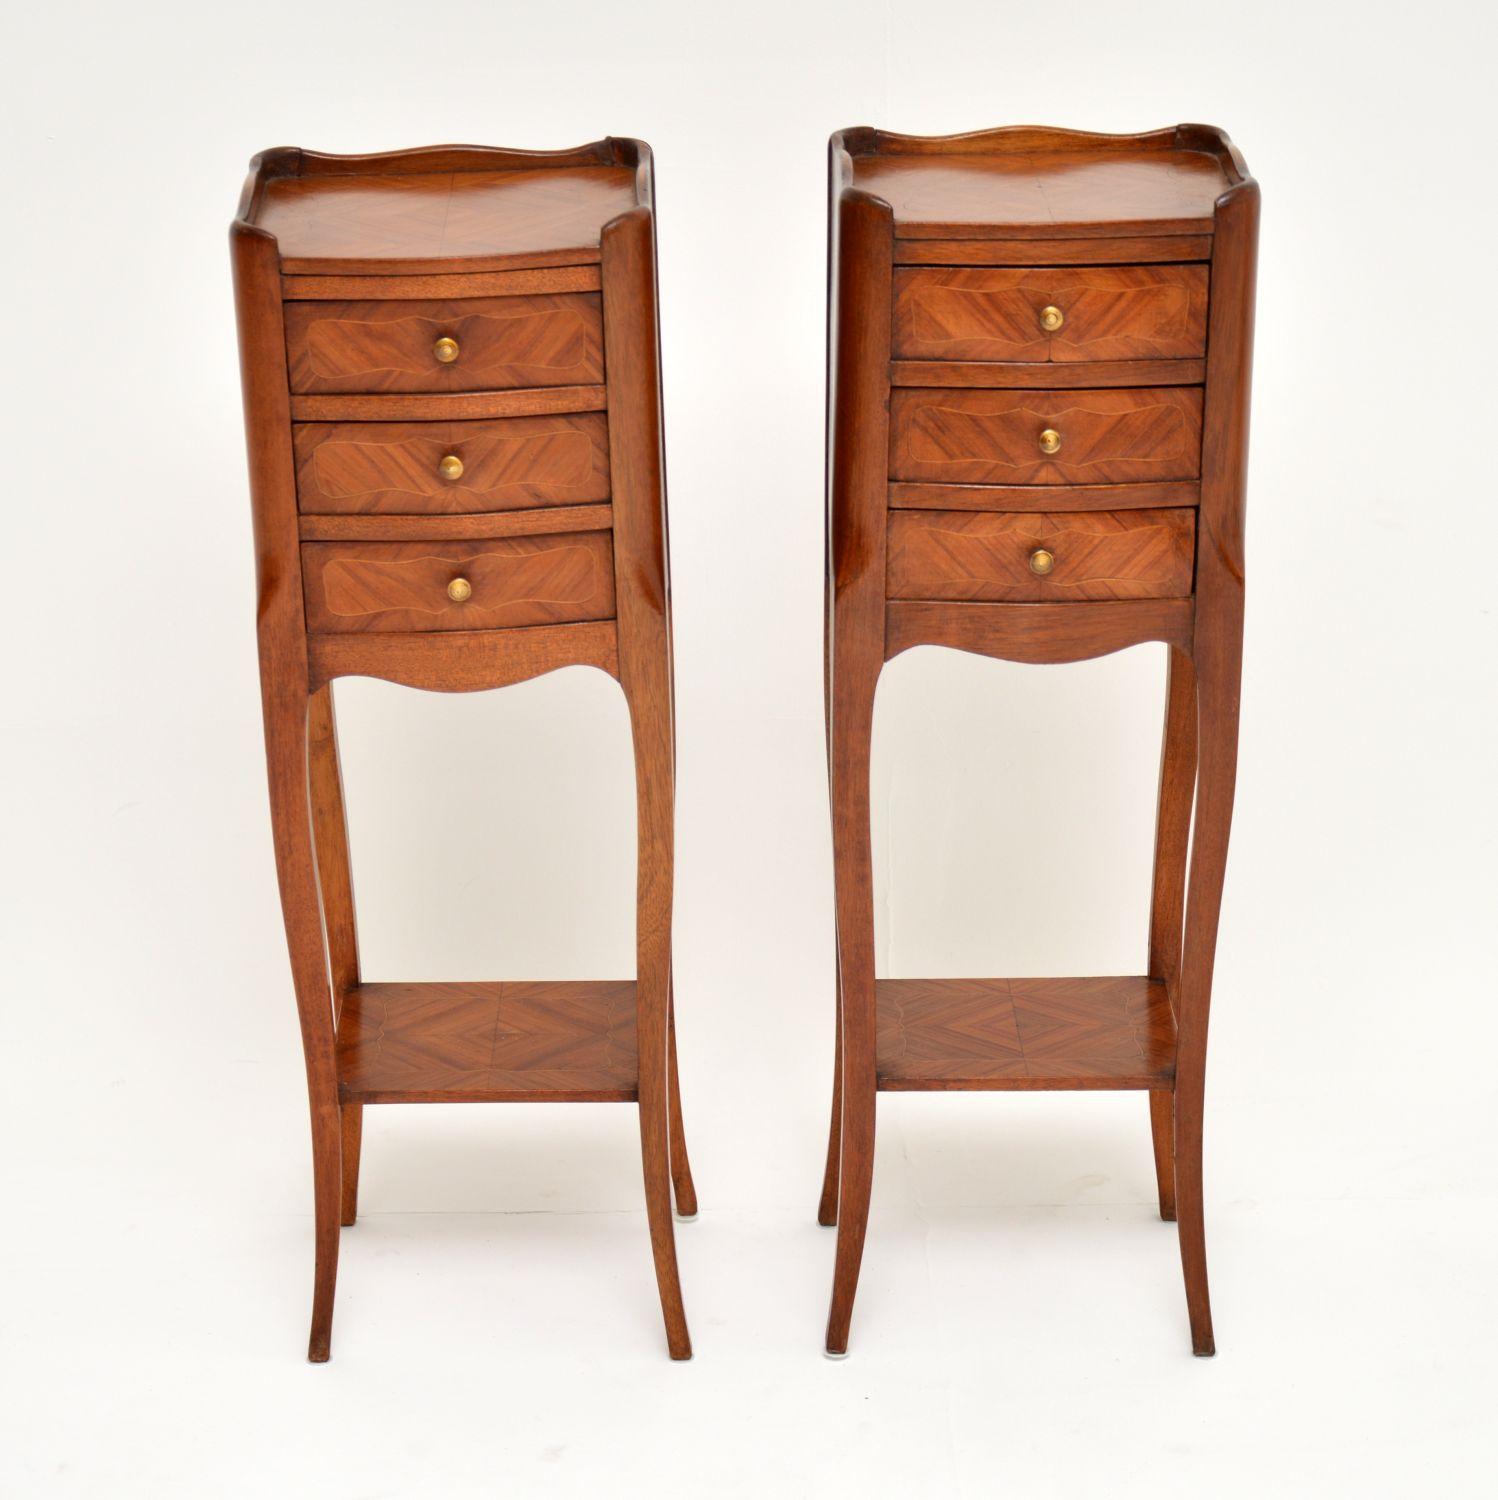 This pair of antique French kingwood cabinets have super slim proportions, so would be ideal for someone with space restrictions in the bedroom. They would also be suitable for lamp or side tables & they have polished finished backs too. The